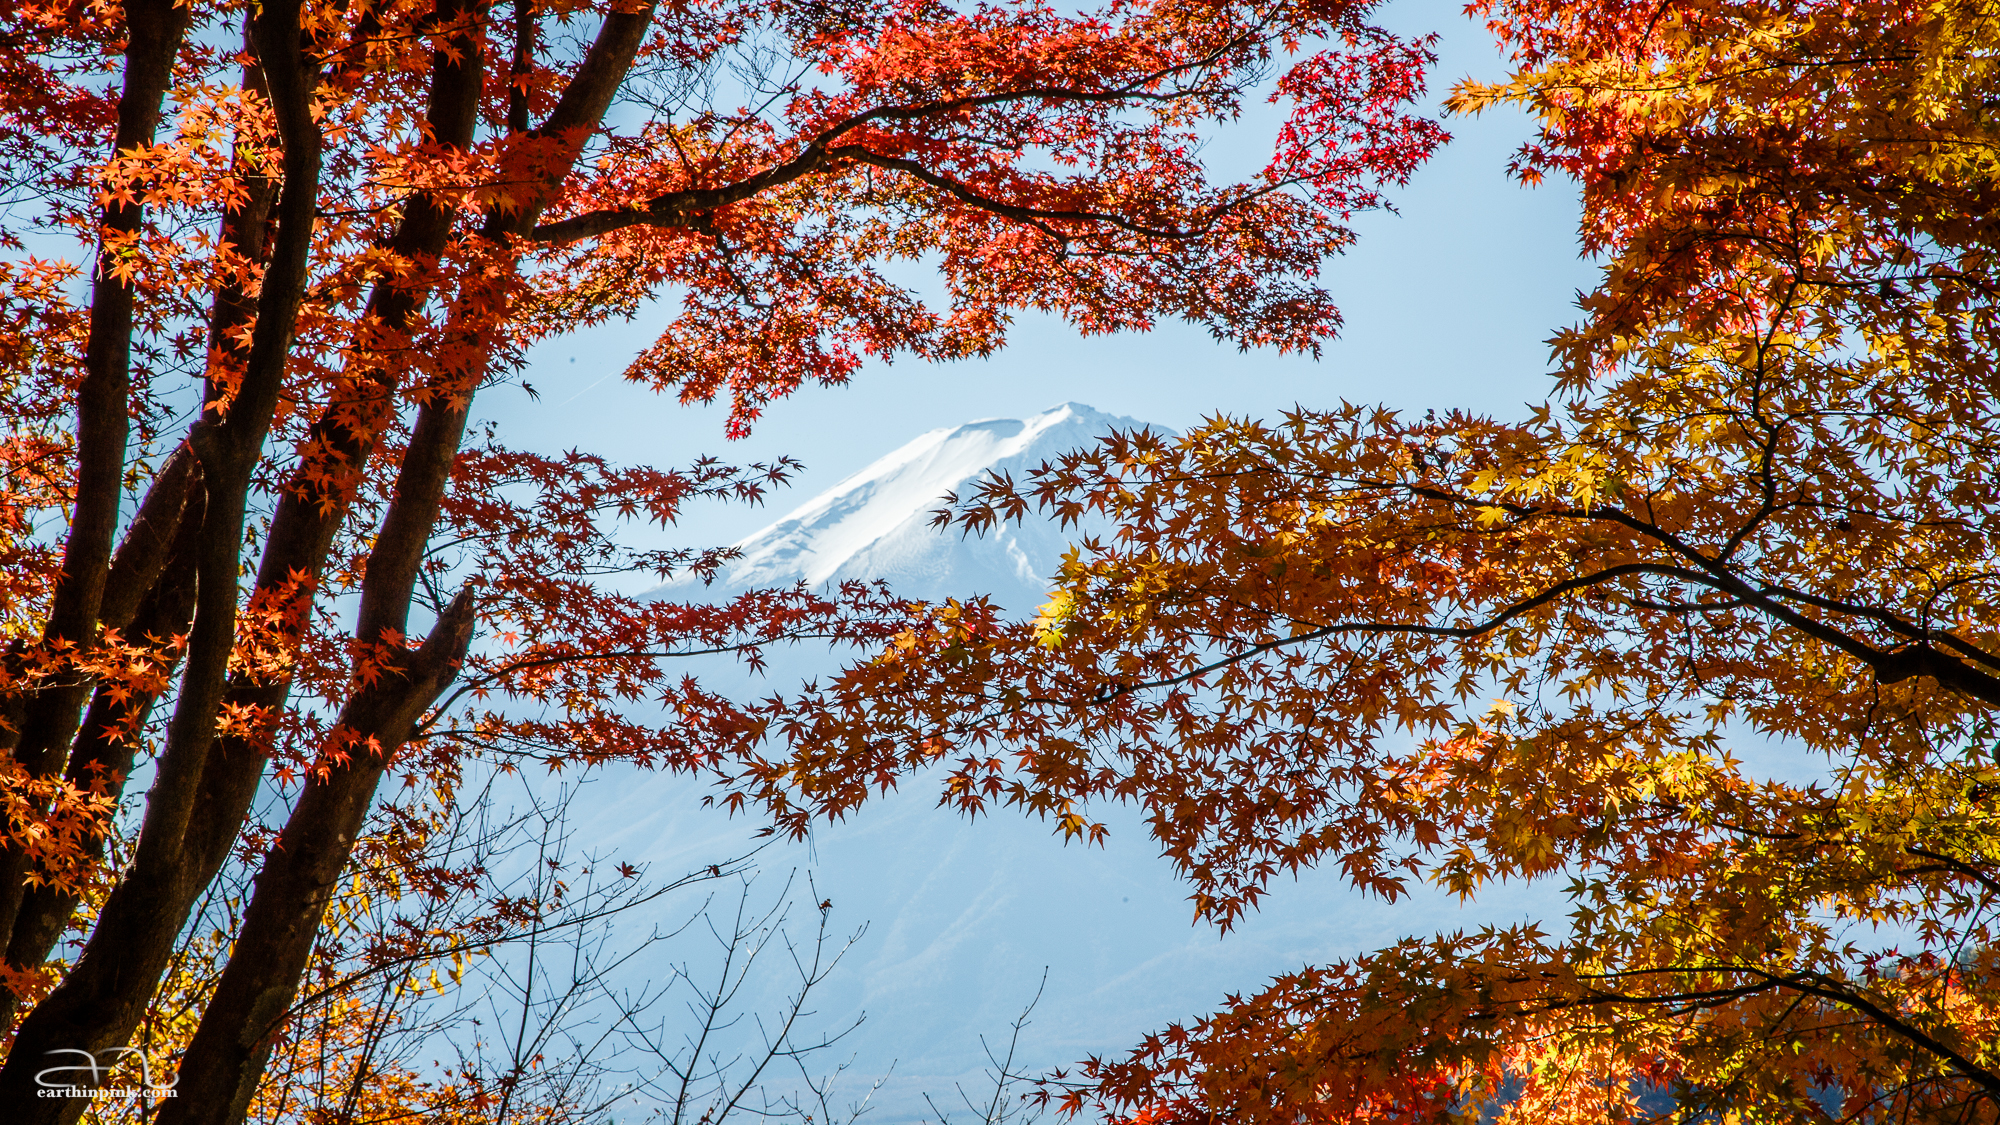 The snowy cap of Mt. Fuji hidden behind the colourful leaves of the maple tunnel along the northern shores of Lake Kawaguchiko.